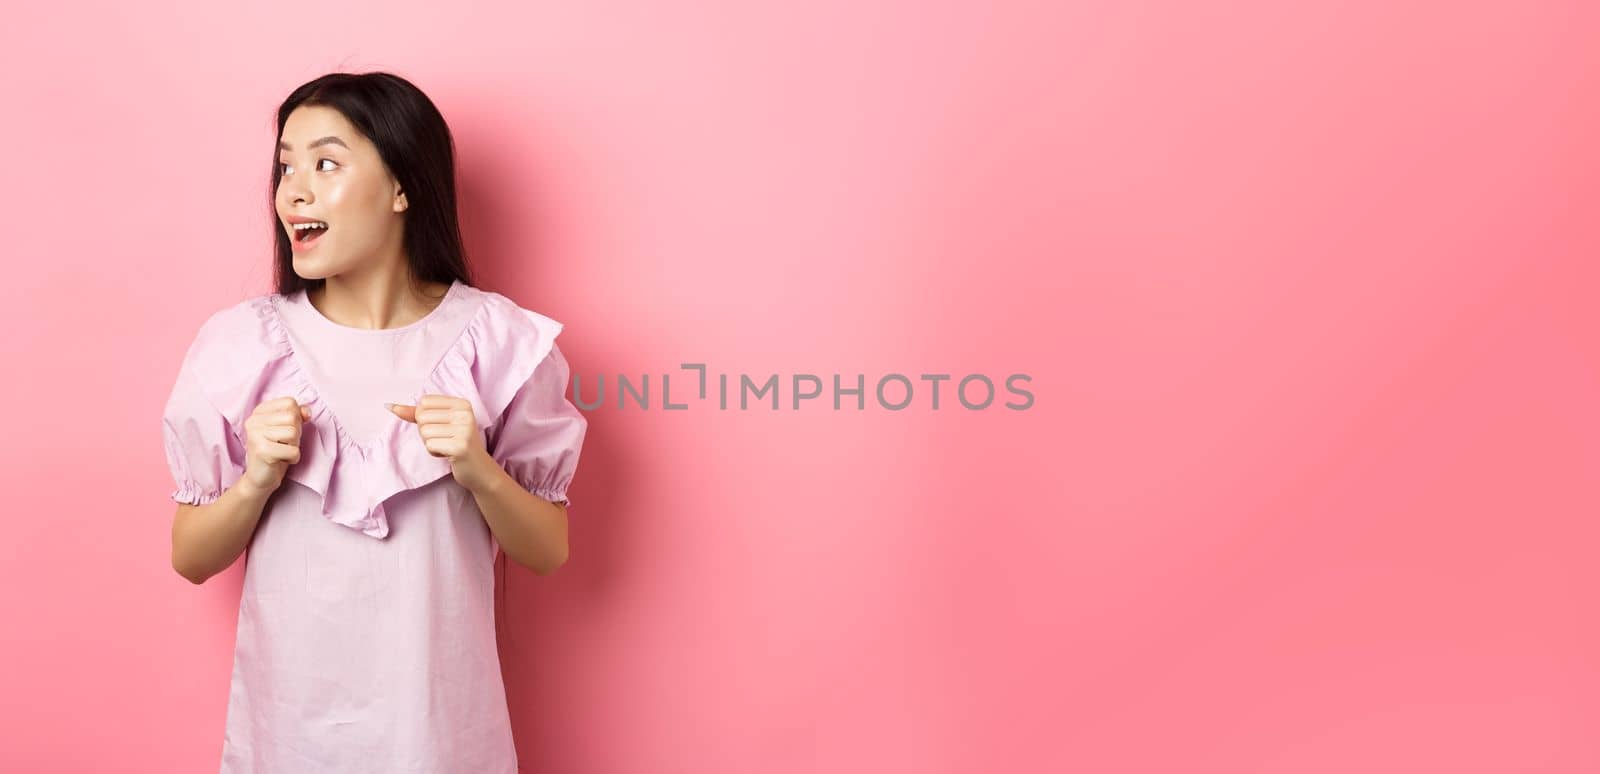 Excited asian girl look left with motivated face, smiling happy, standing in dress on pink background.